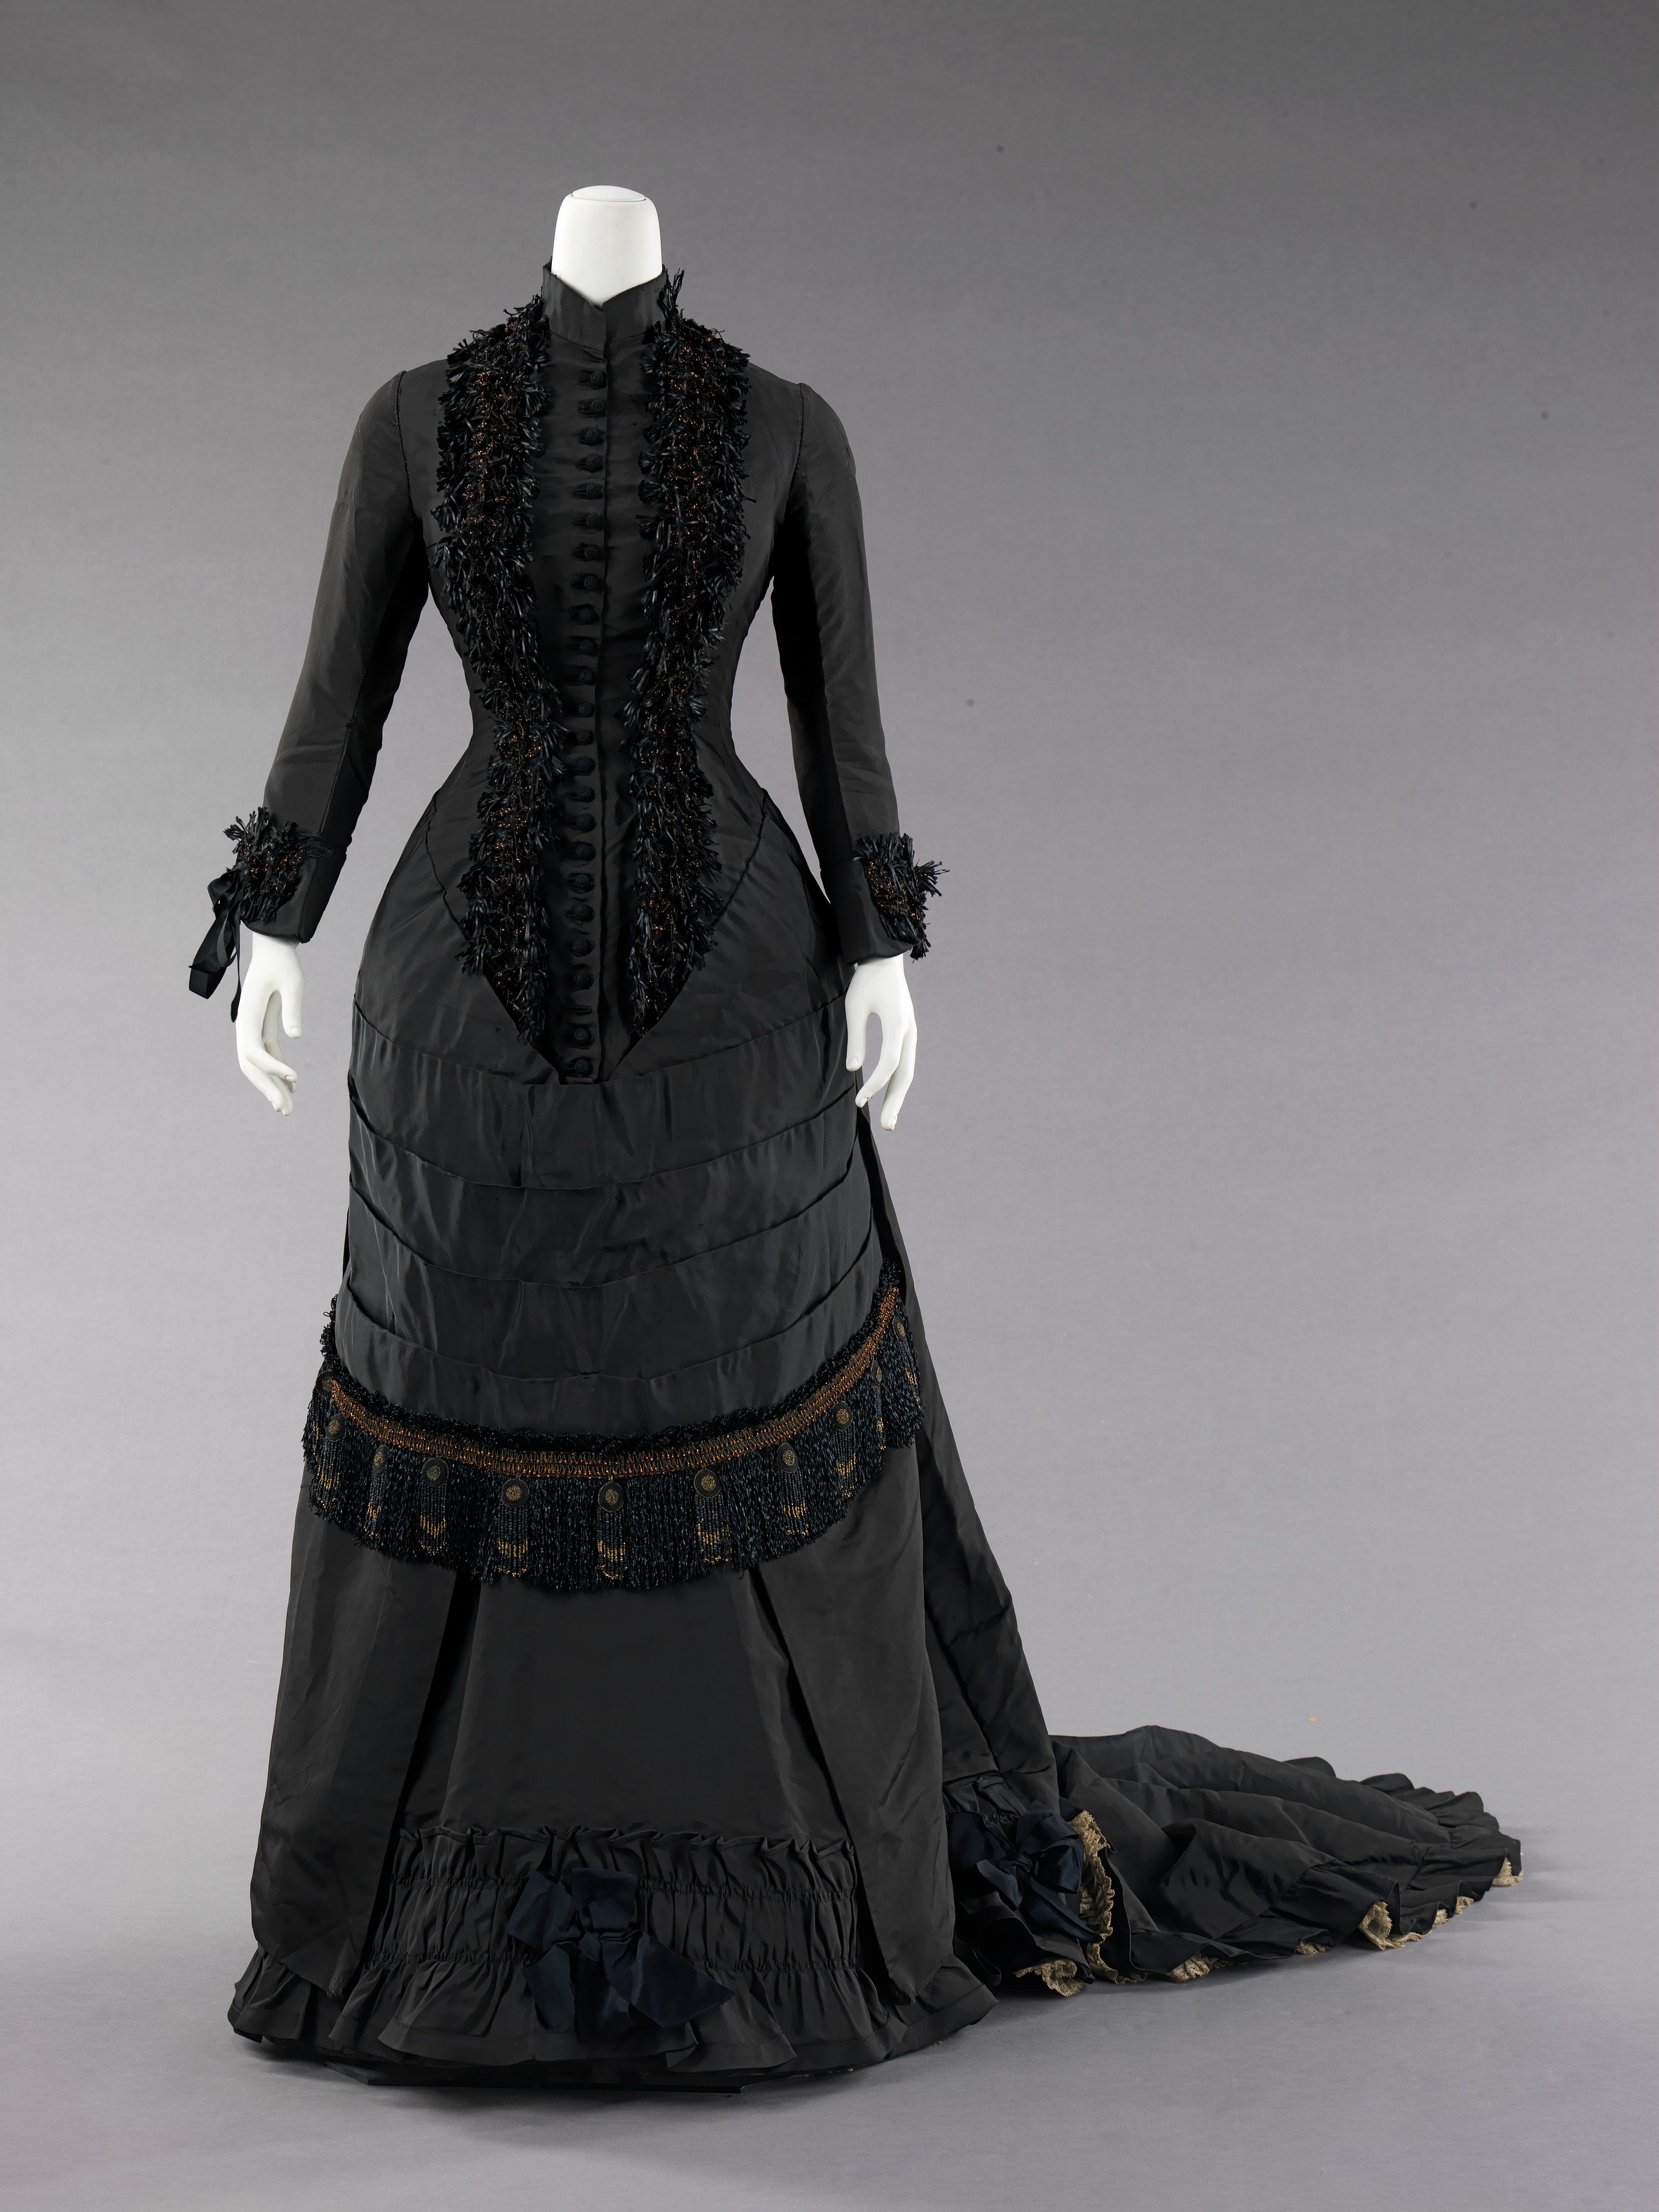 1880s Fashion History - Dresses, Clothing, Costumes  1880s fashion,  Fashion history, Victorian fashion women